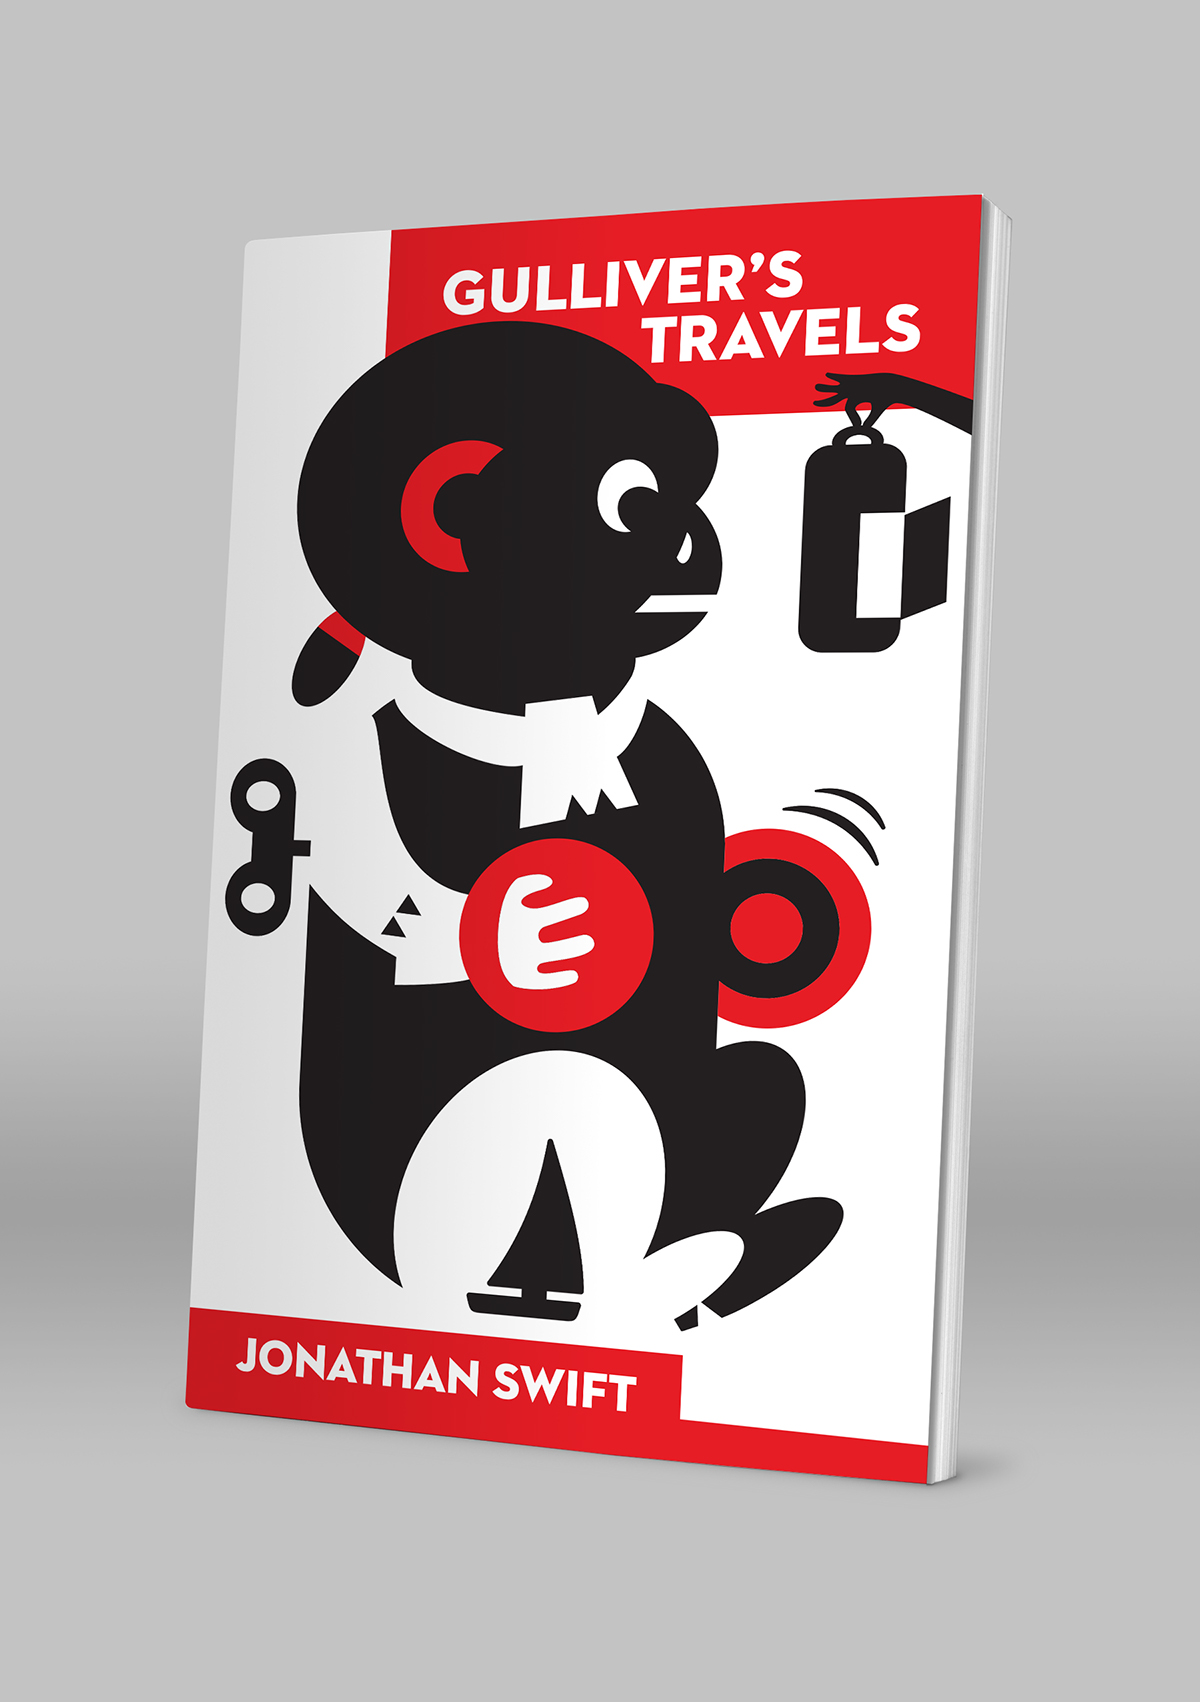 old dominion university book cover gulliver's travels jonathan swift trade paperback